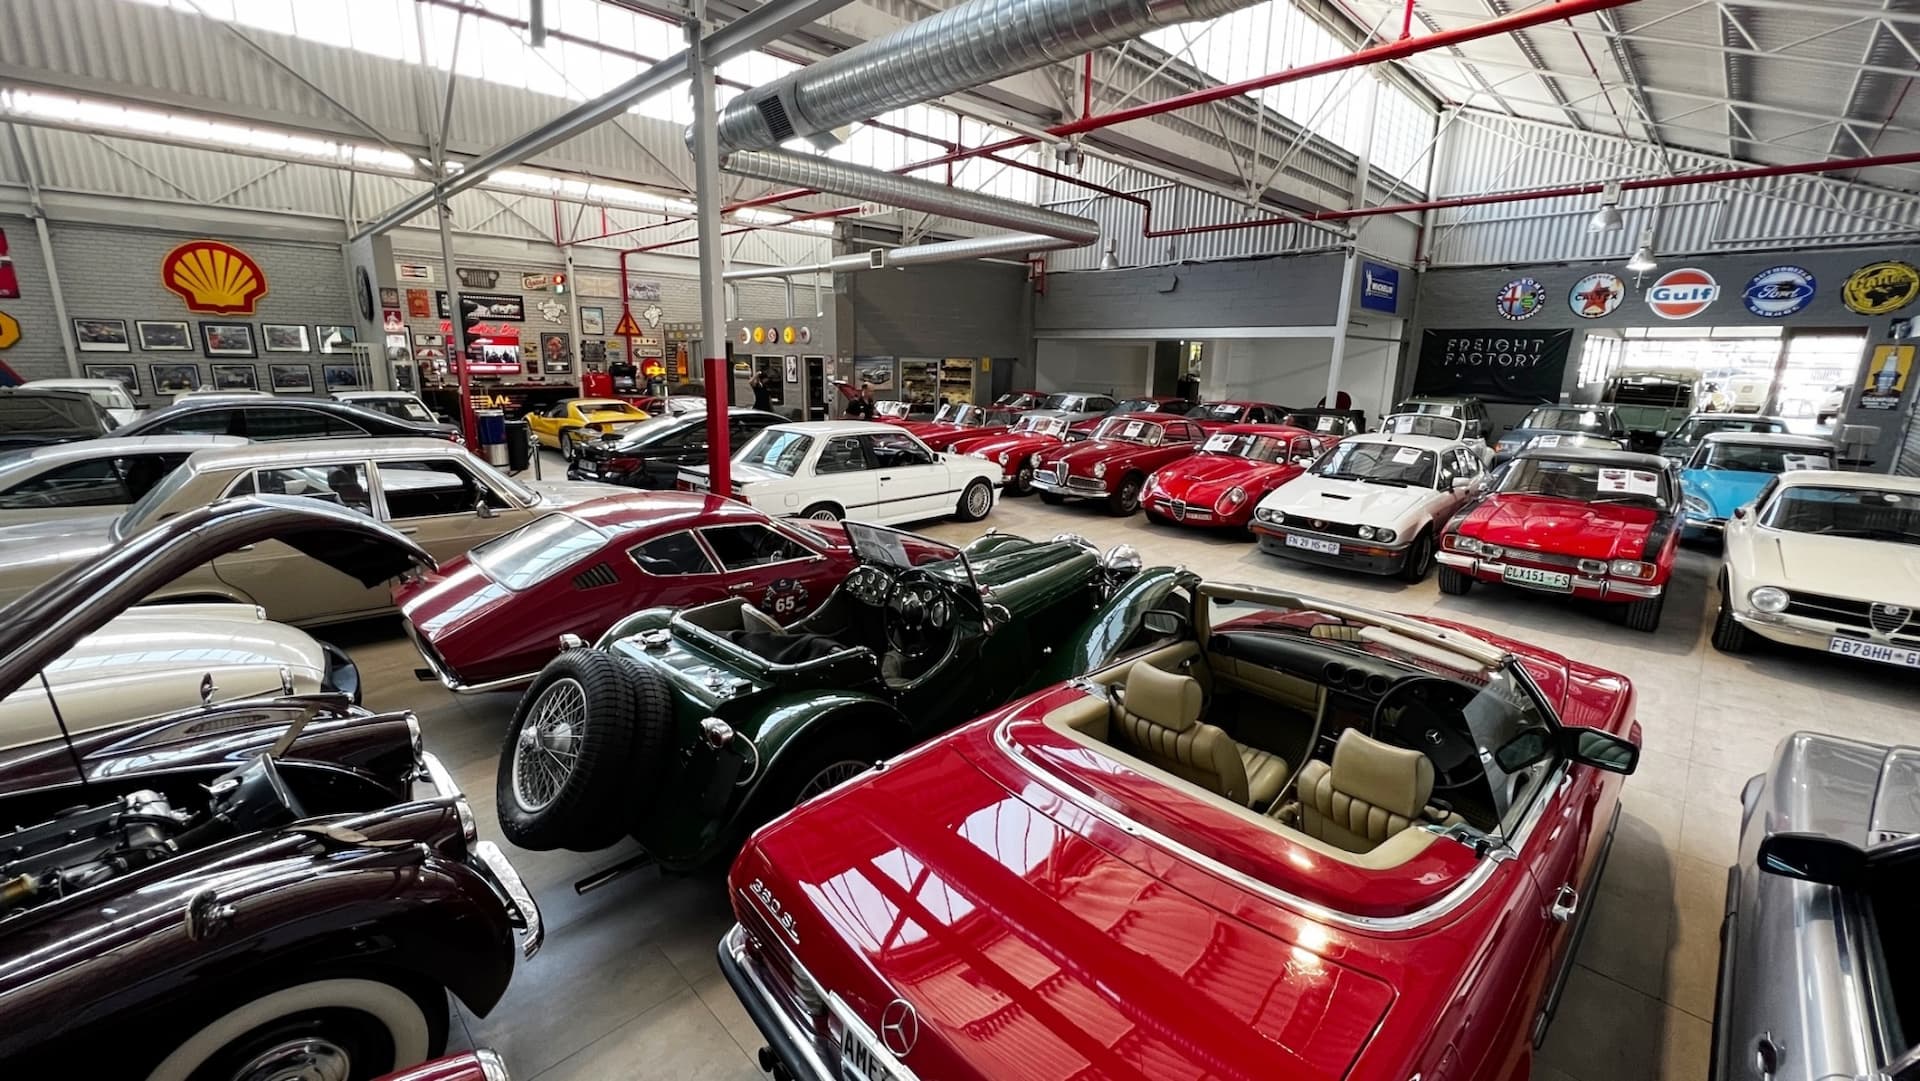 GLOBAL DATA SHOWS SOUTH AFRICA IS HEADED FOR RECORD COLLECTOR CAR SALES YEAR